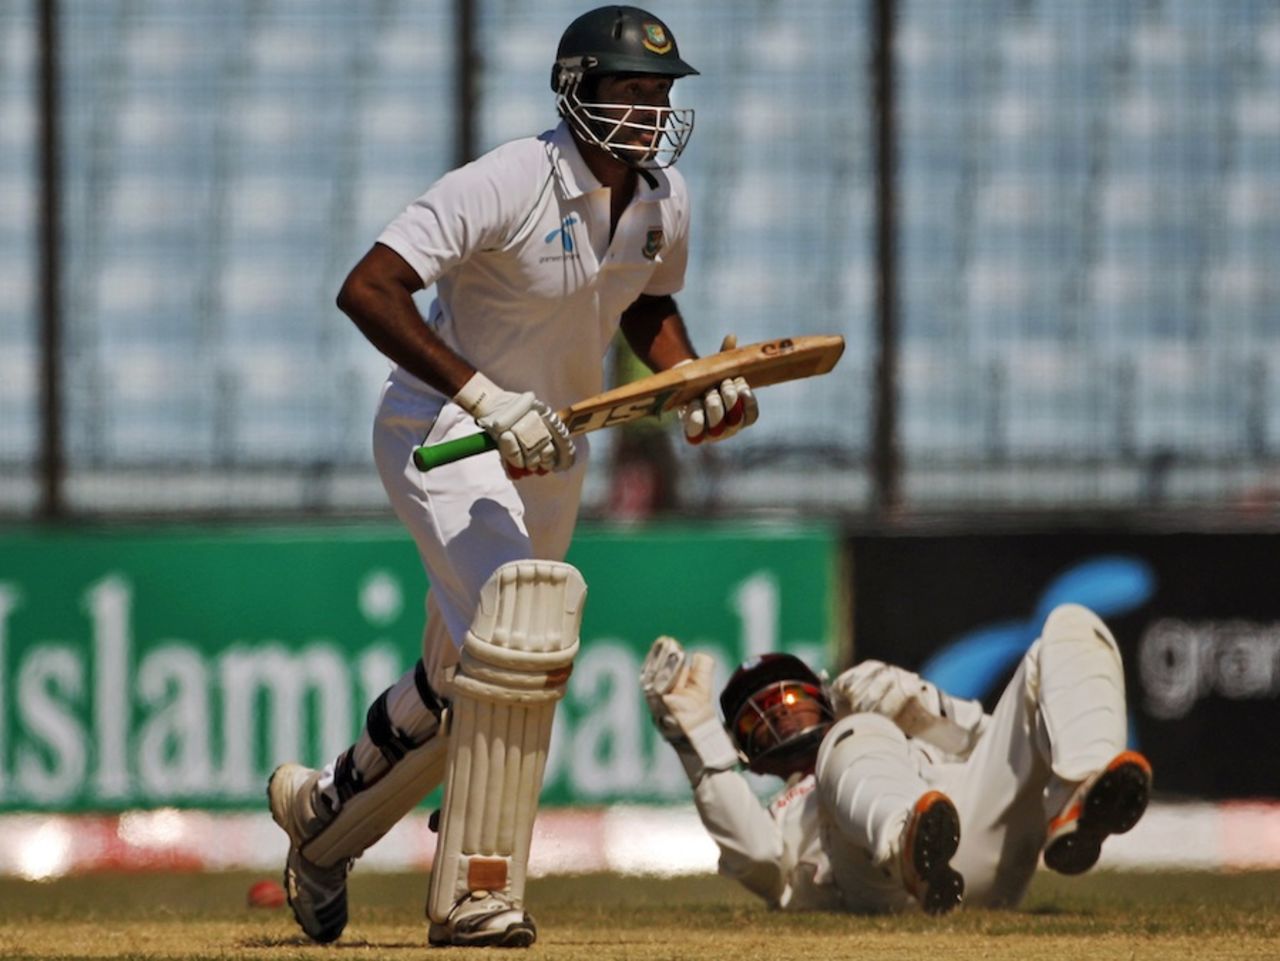 Shahadat Hossain bats on the fourth day, Bangladesh v West Indies, 1st Test, Chittagong, 4th day, October 24, 2011